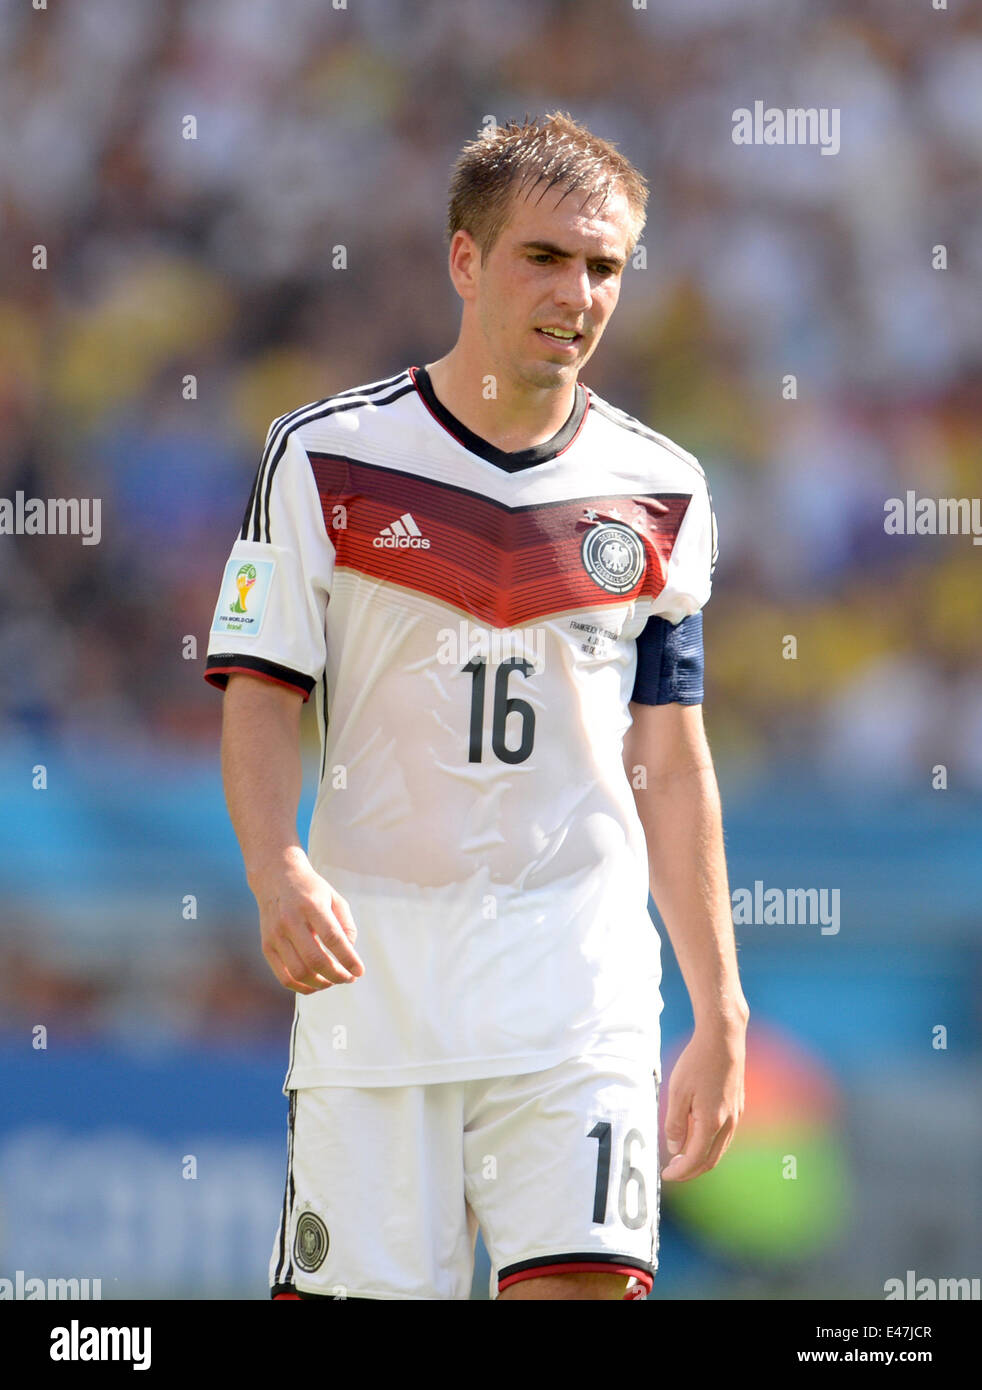 Rio de Janeiro, Brazil. 04th July, 2014. Philipp Lahm of Germany reacts during the FIFA World Cup 2014 quarter final soccer match between France and Germany at Estadio do Maracana in Rio de Janeiro, Brazil, 04 July 2014. Photo: Andreas Gebert/dpa/Alamy Live News Stock Photo